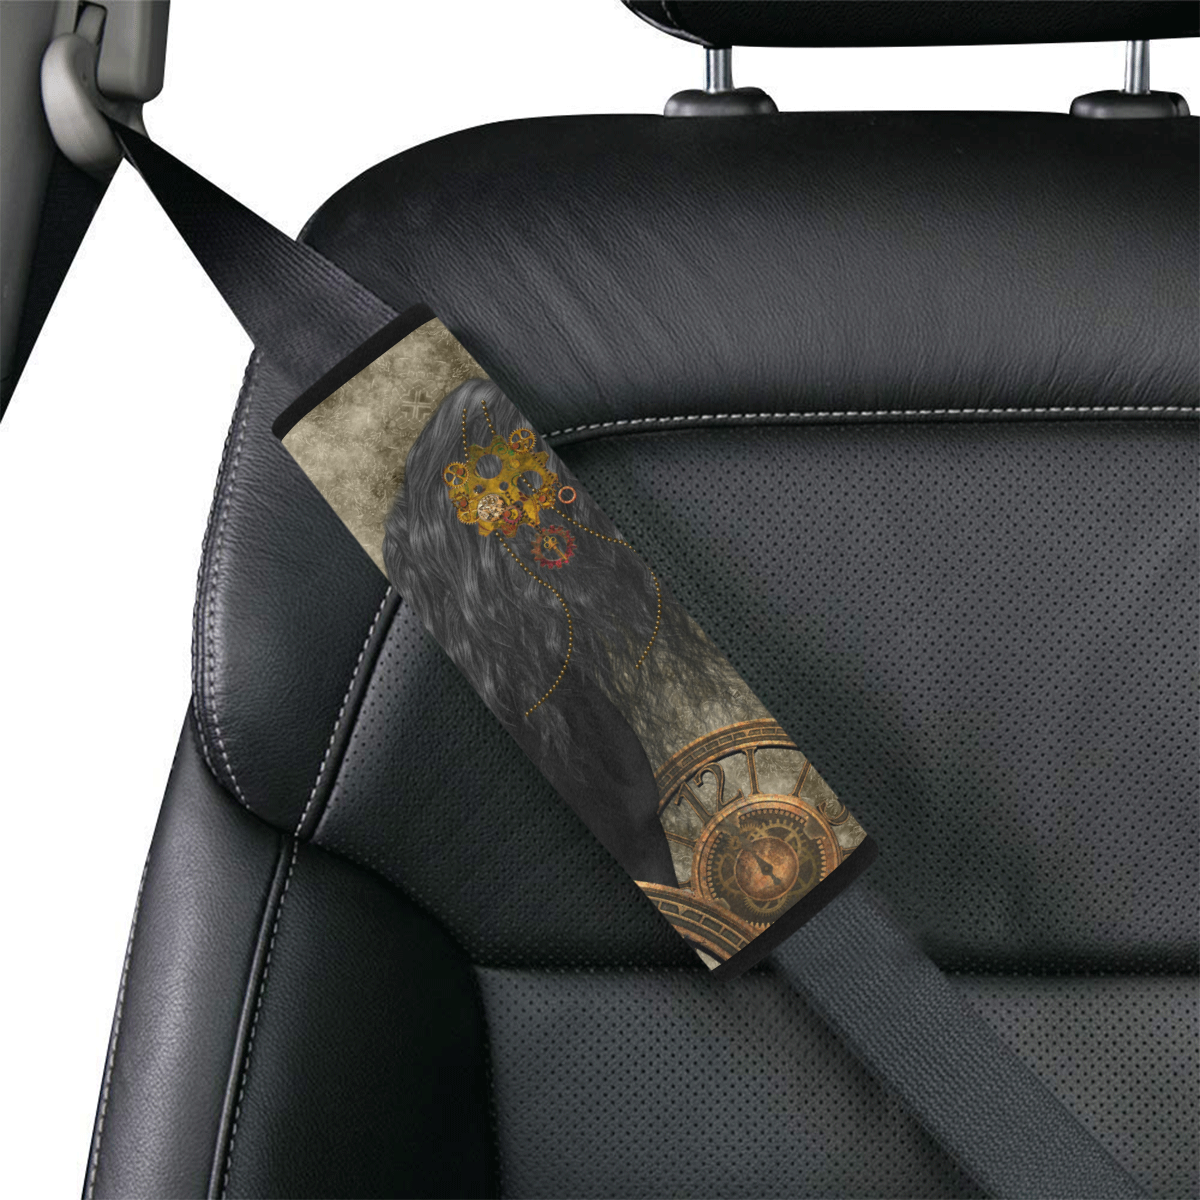 Beautiful wild horse with steampunk elements Car Seat Belt Cover 7''x8.5''